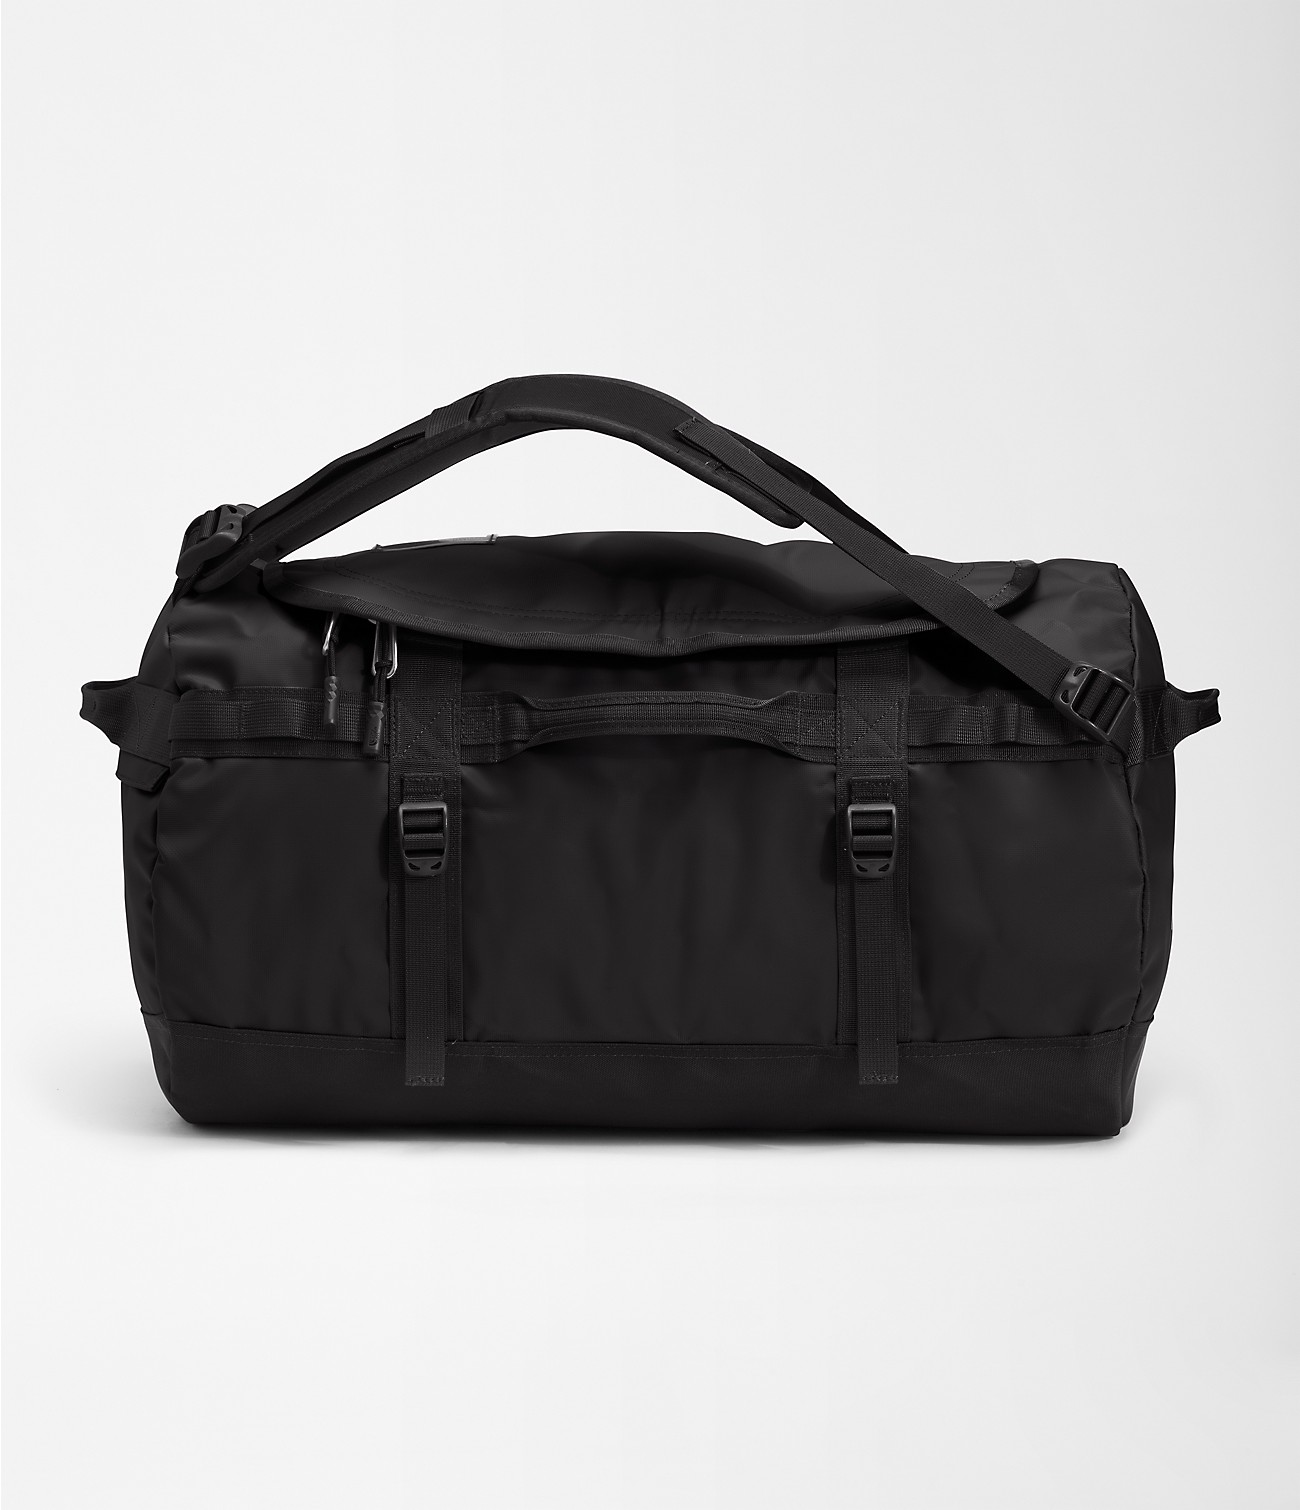 Unlock Wilderness' choice in the Herschel Vs North Face comparison, the Base Camp Duffel by The North Face